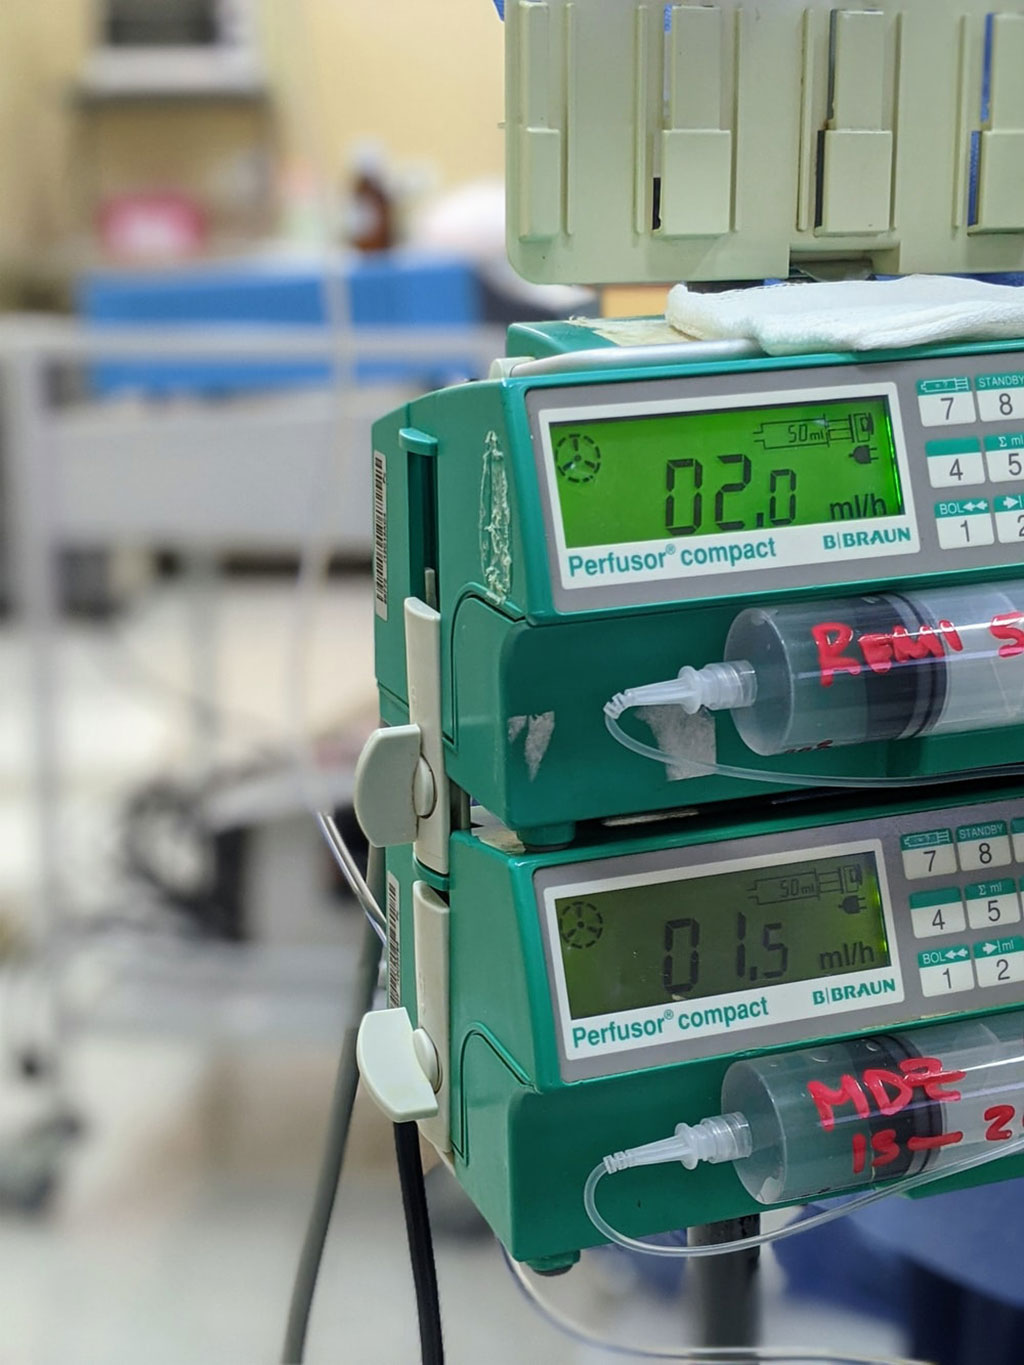 Image: ICU Medical has completed acquisition of Smiths Medical (Photo courtesy of Unsplash)